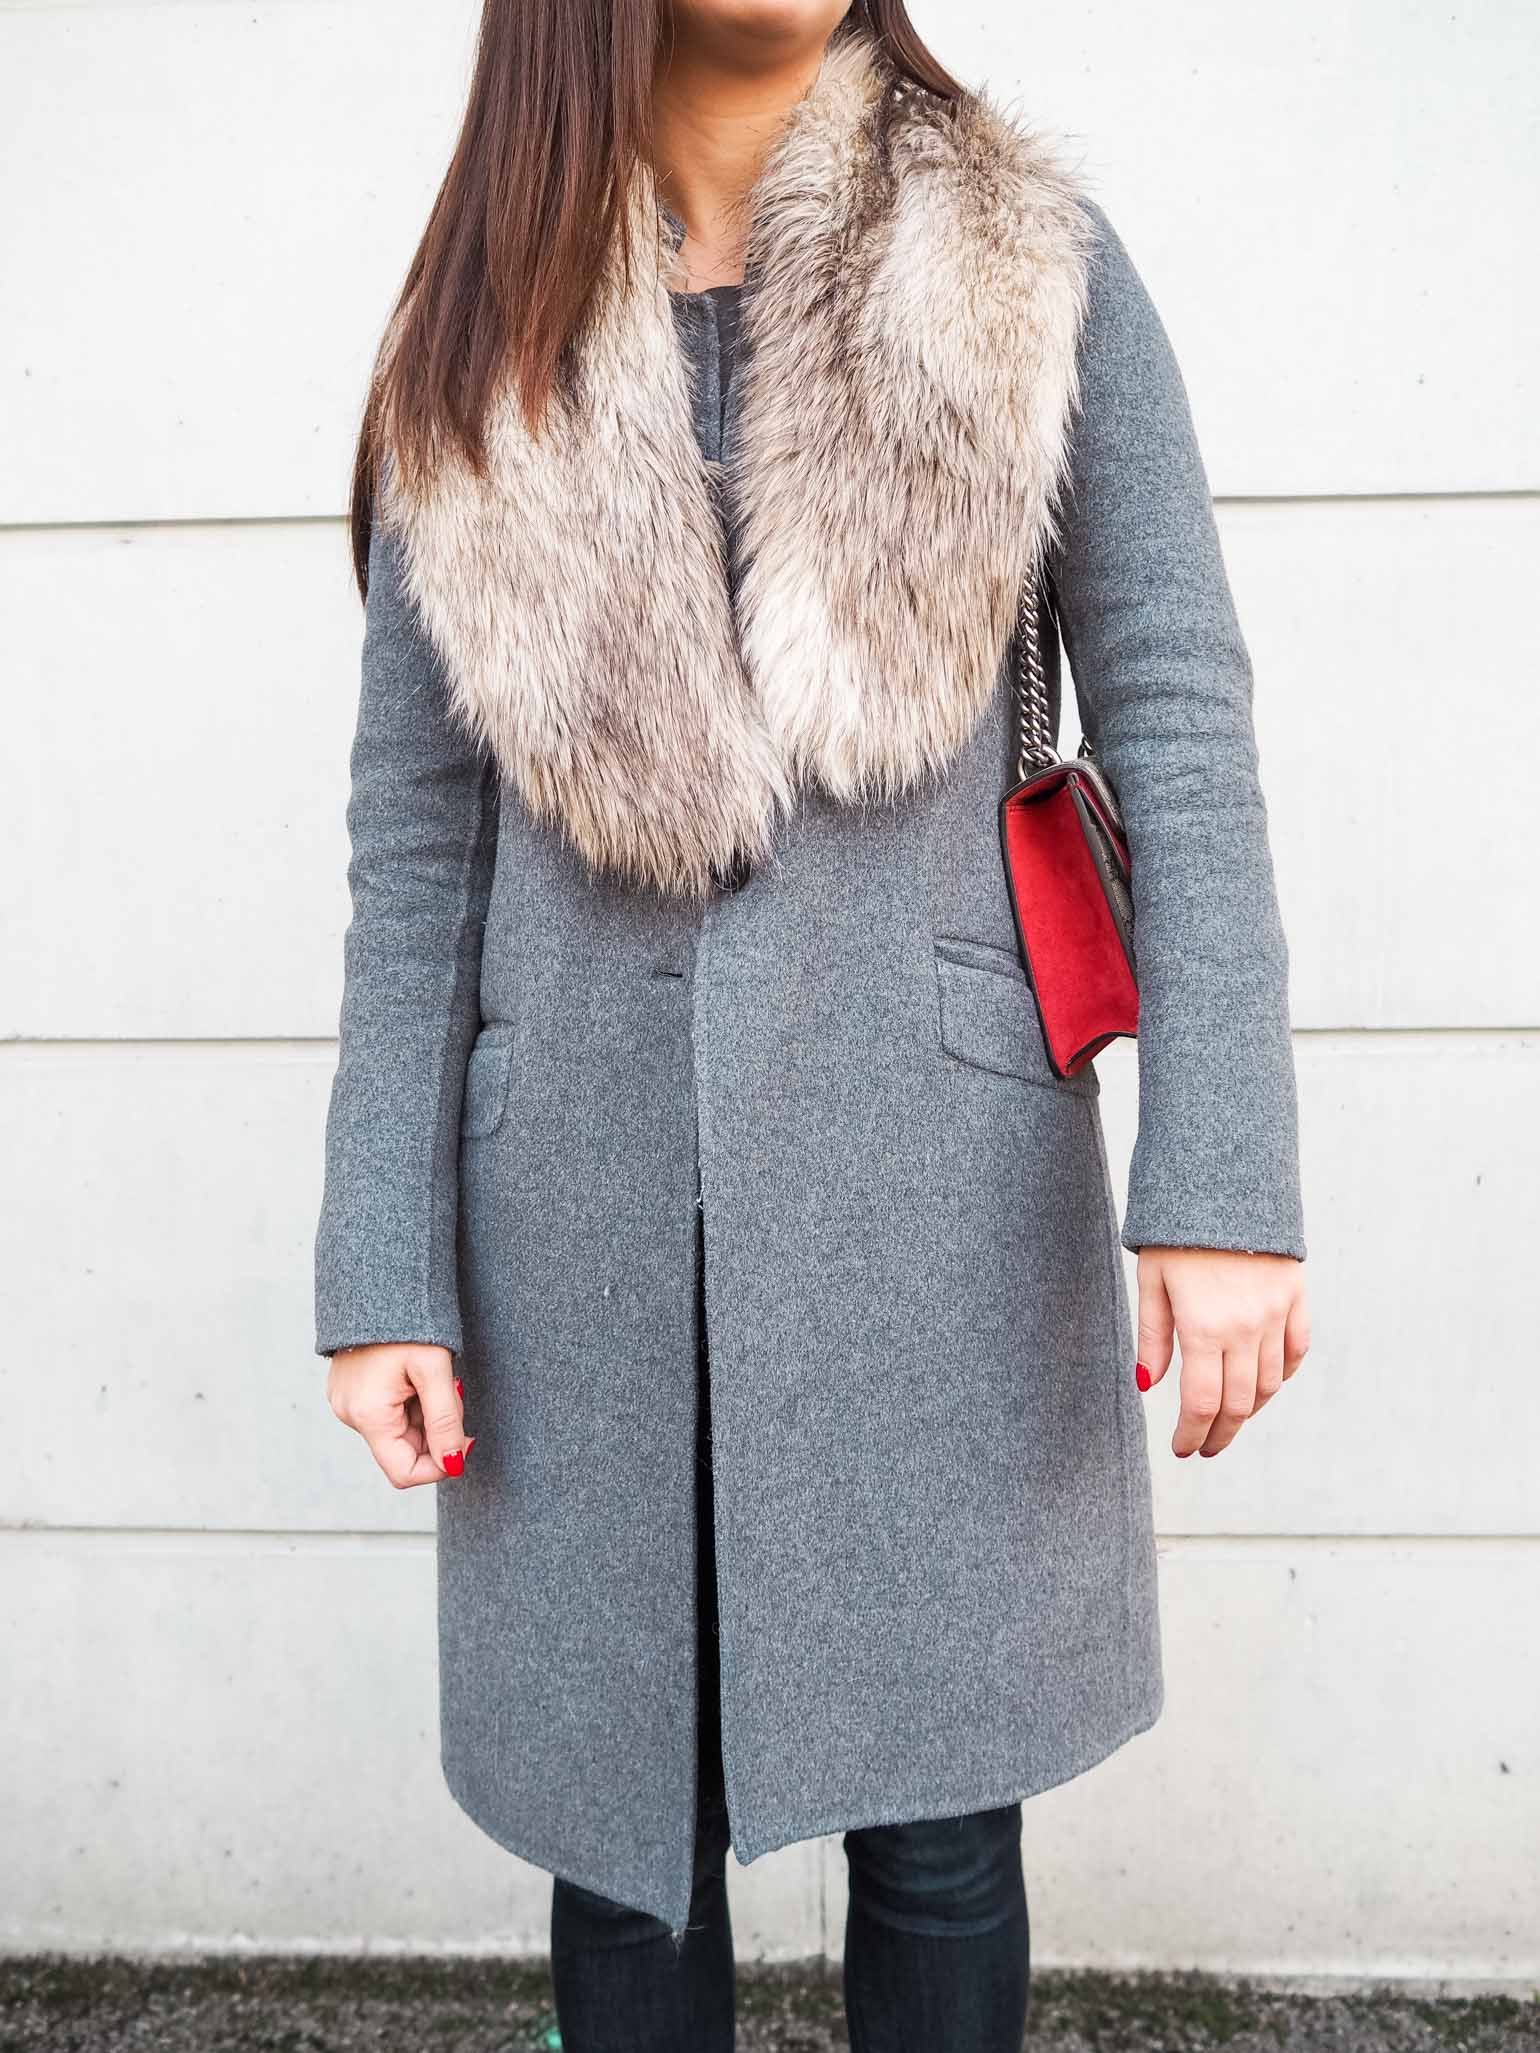 Fashion blogger is wearing a casual weekend style with faux fur